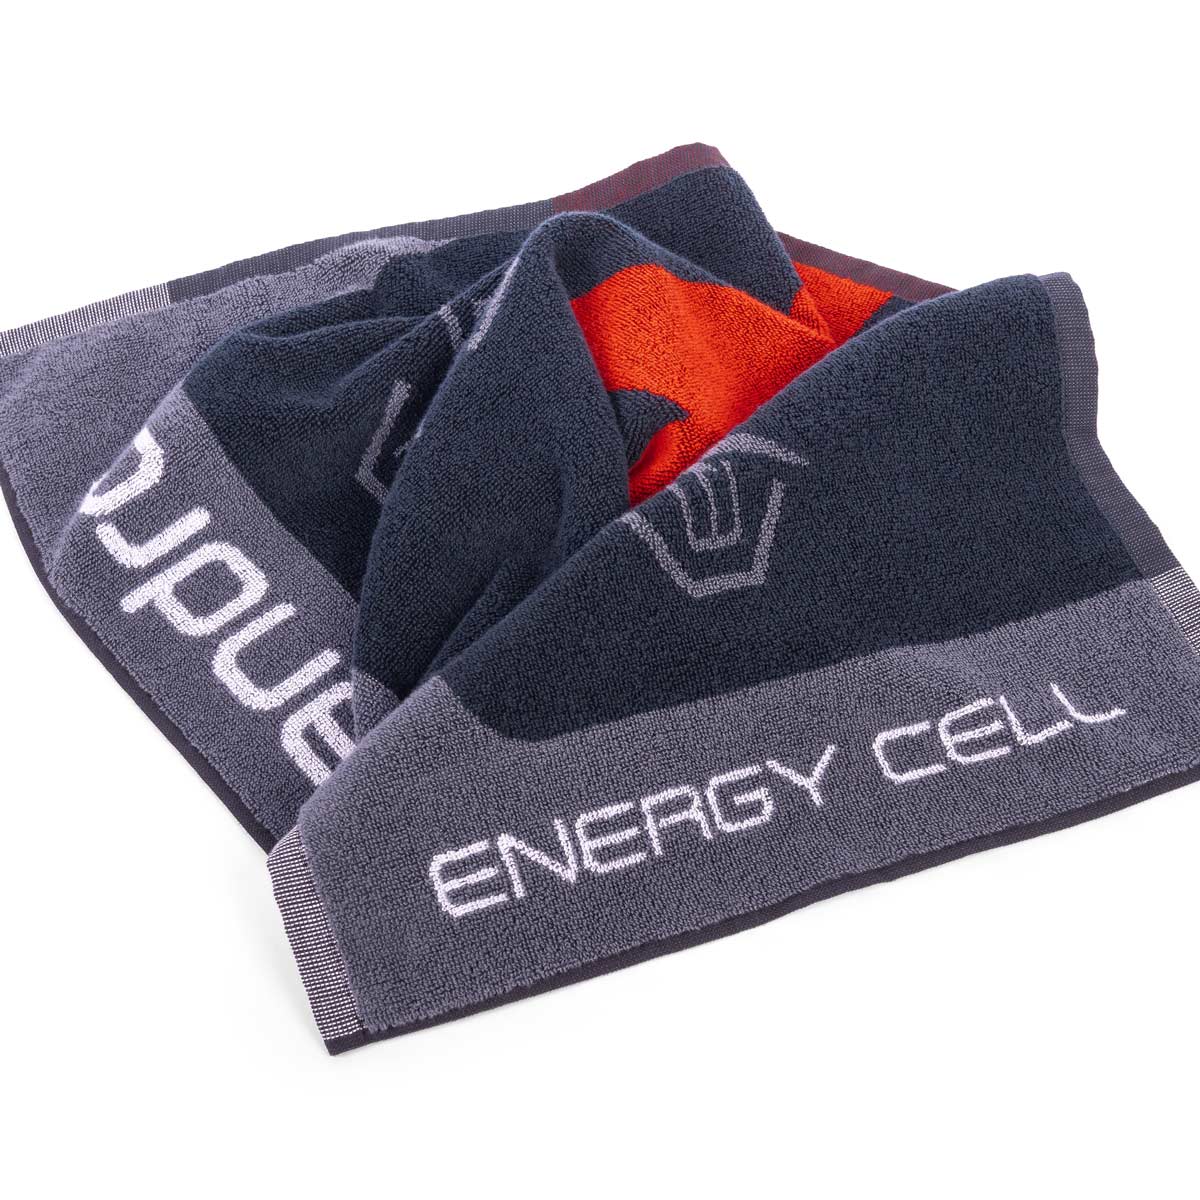 andro Towel Energy Cell S black/red